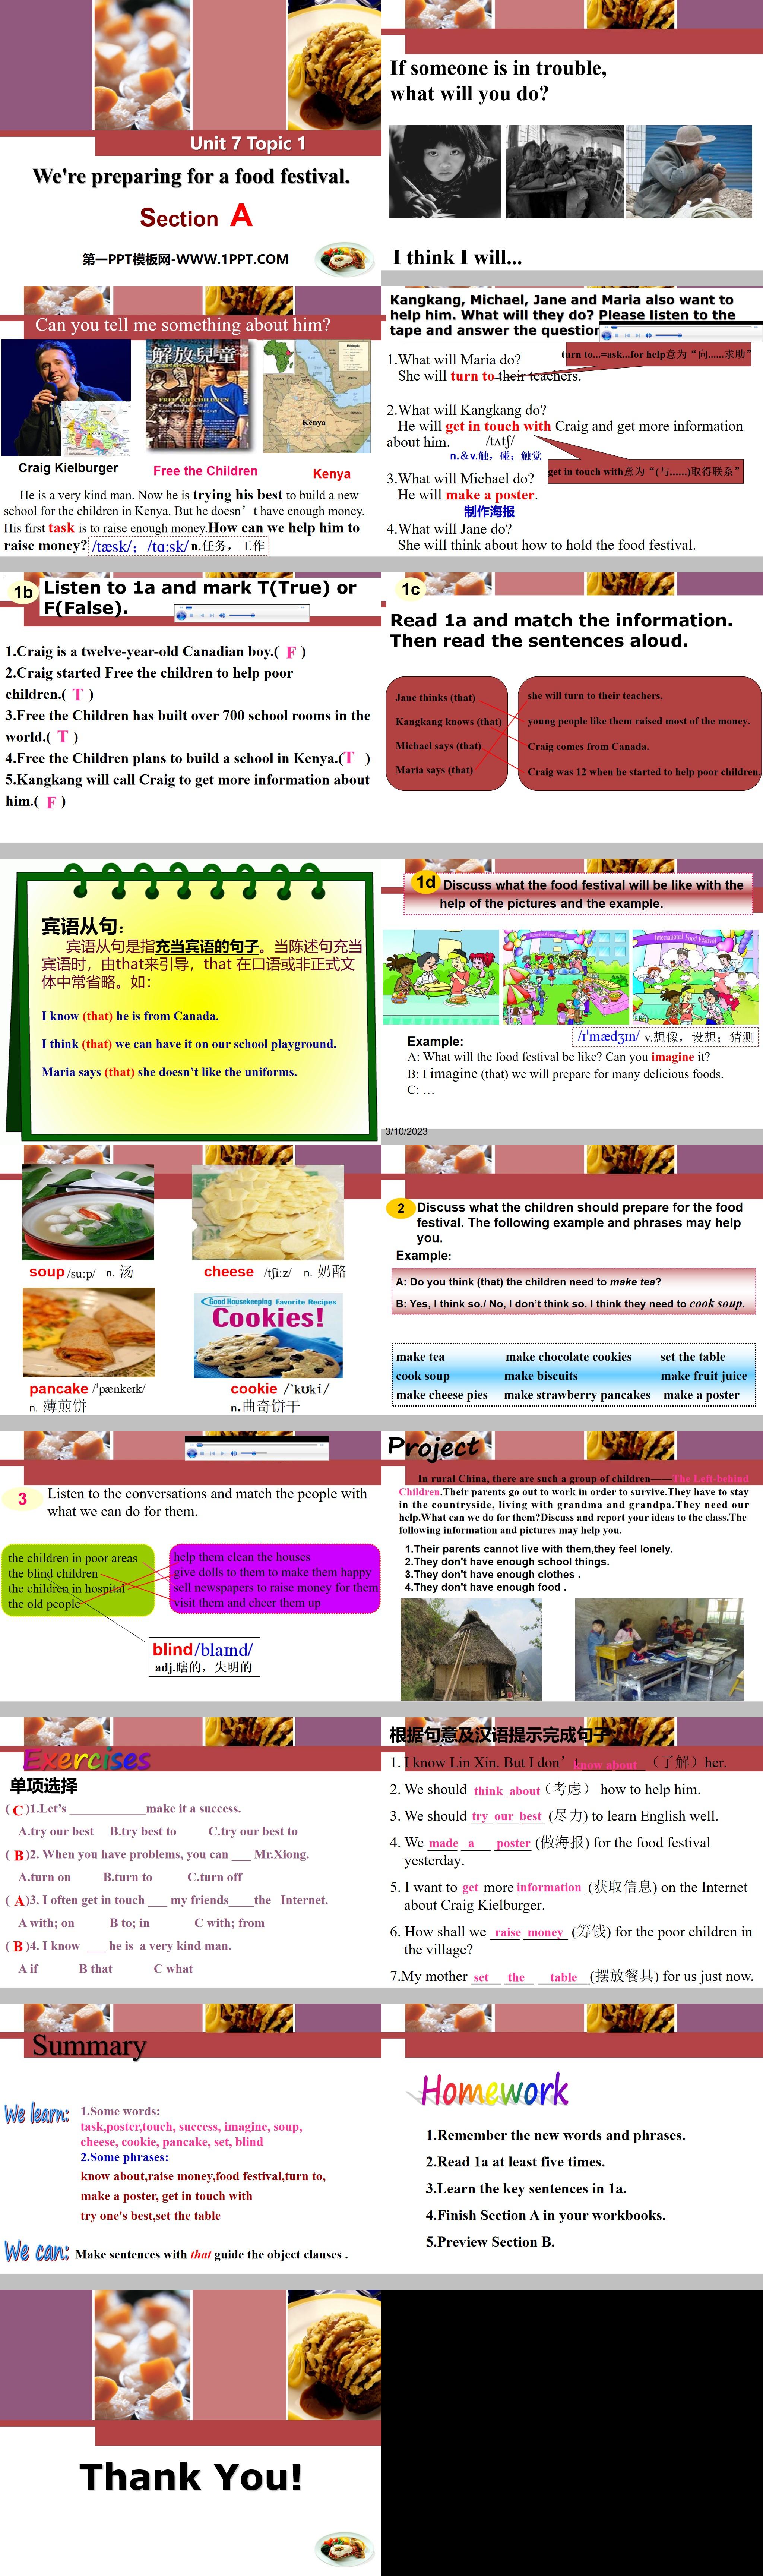 《We're preparing for a food festival》SectionA PPT
（2）